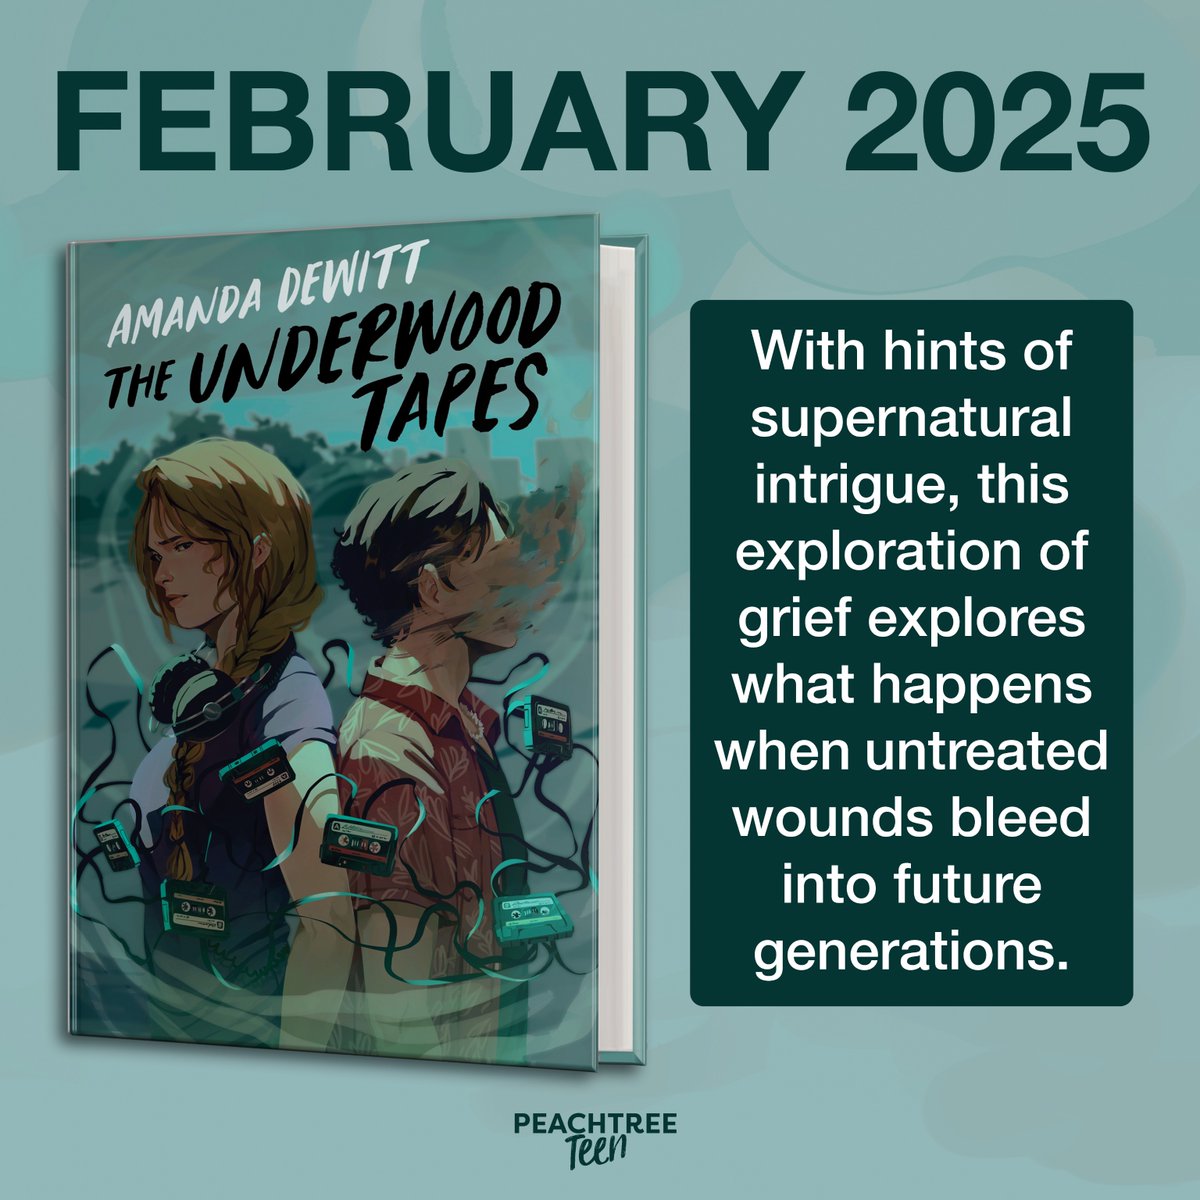 COVER REVEAL! The AMAZING cover of THE UNDERWOOD TAPES is here! Coming next year from @AmandaMDeWitt! #yalit #coverreveal